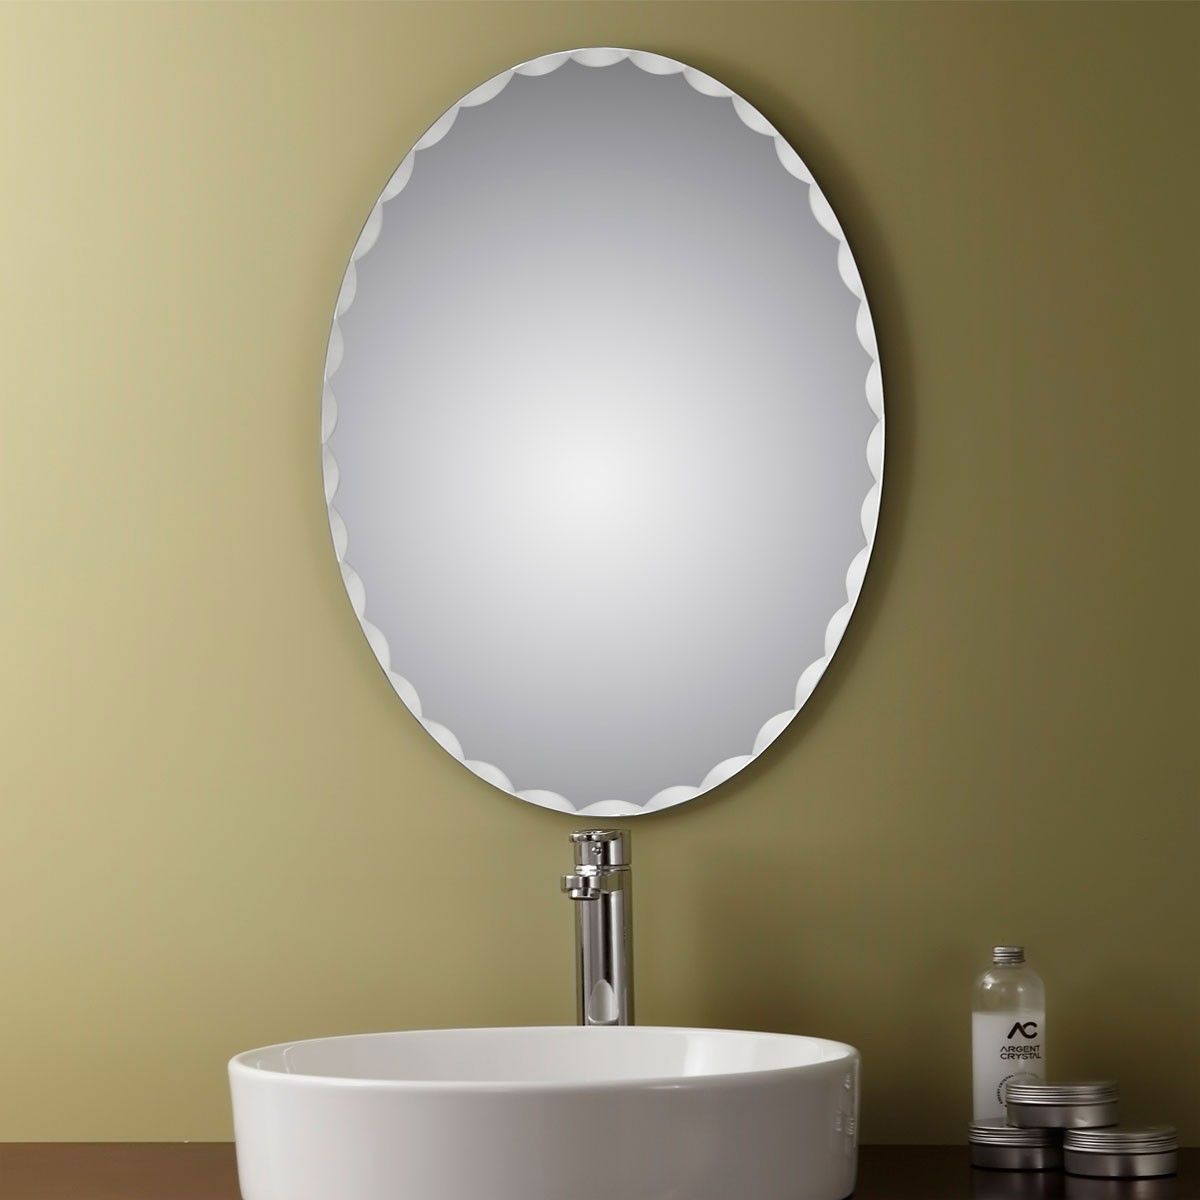 Unframed Bathroom Silvered Circle Mirror - Vertical and Pencil Polished Edge/23 Inch x 31 Inch (YJ-60004H)